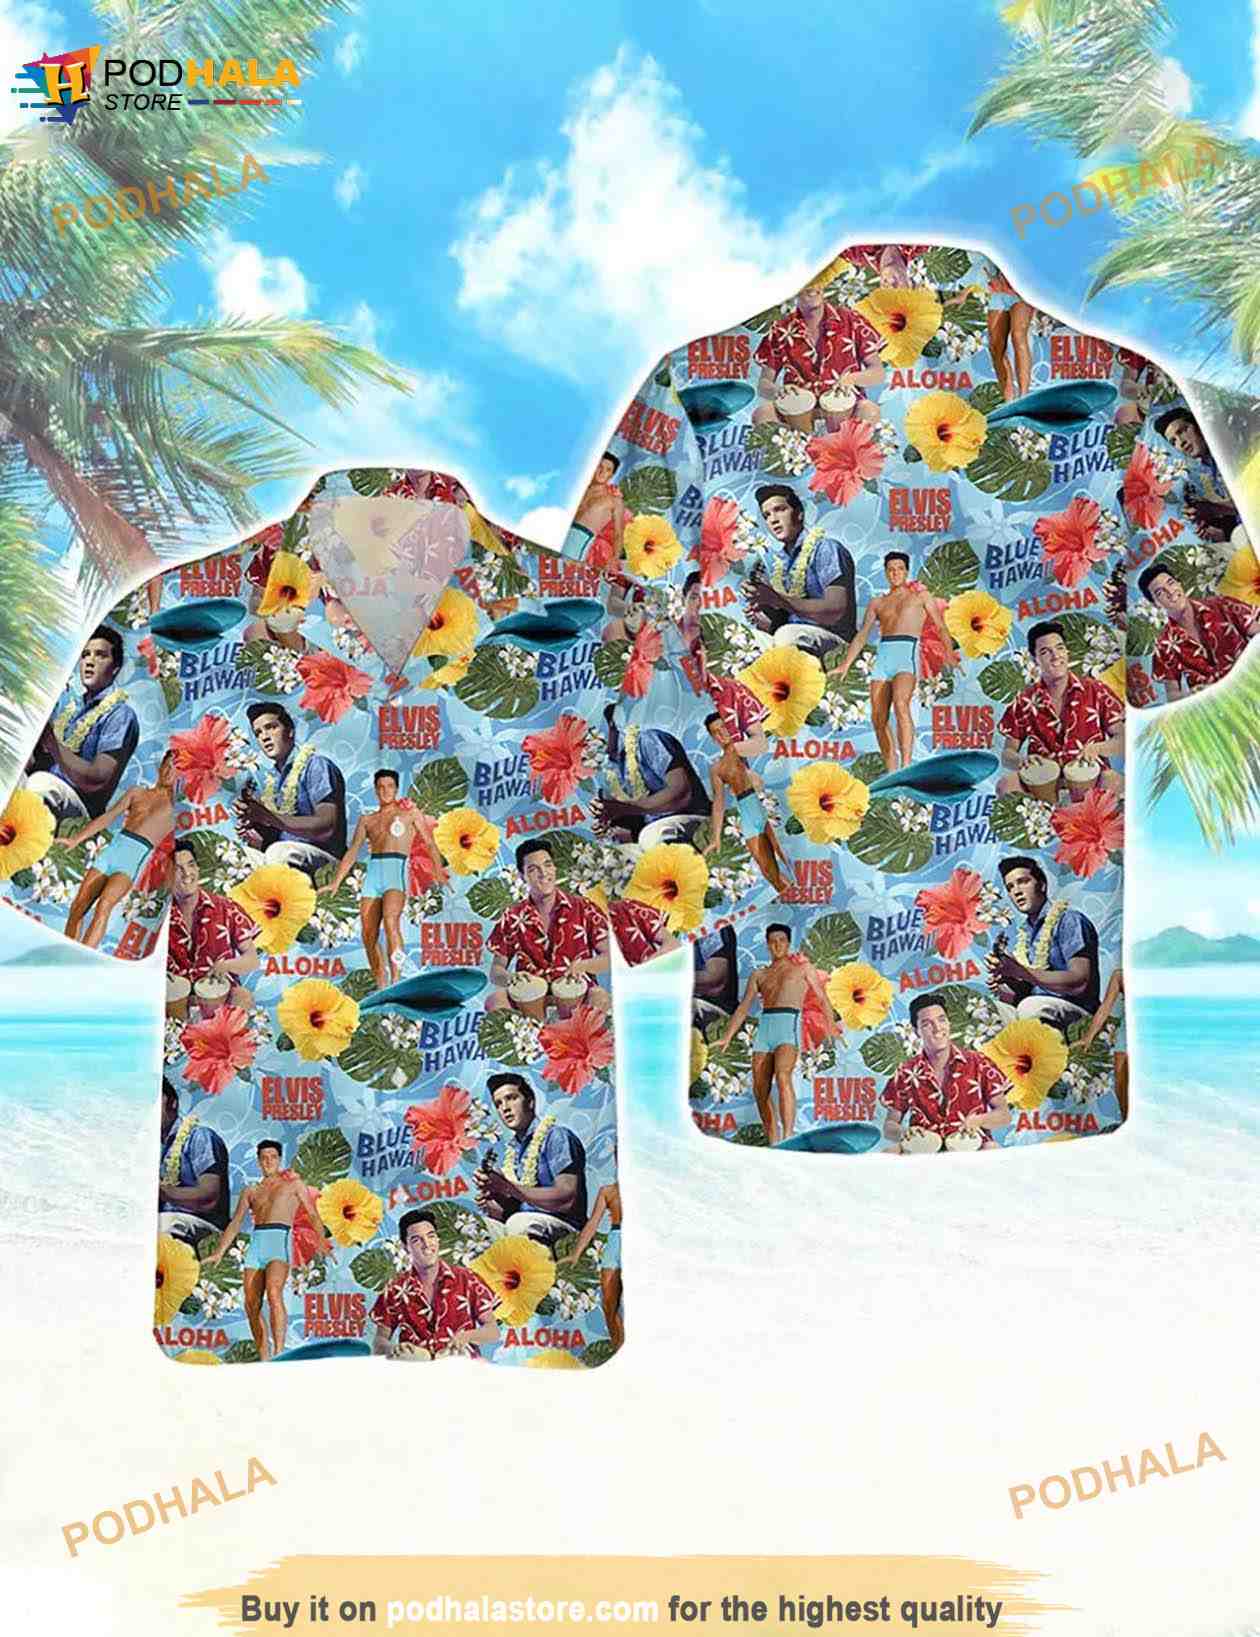 Elvis Presley Aloha Hawaiian Shirt, Elvis Hawaii Shirt, Summer Tropical Button Shirt - Bring Your Ideas, Thoughts And Imaginations Into Reality Today